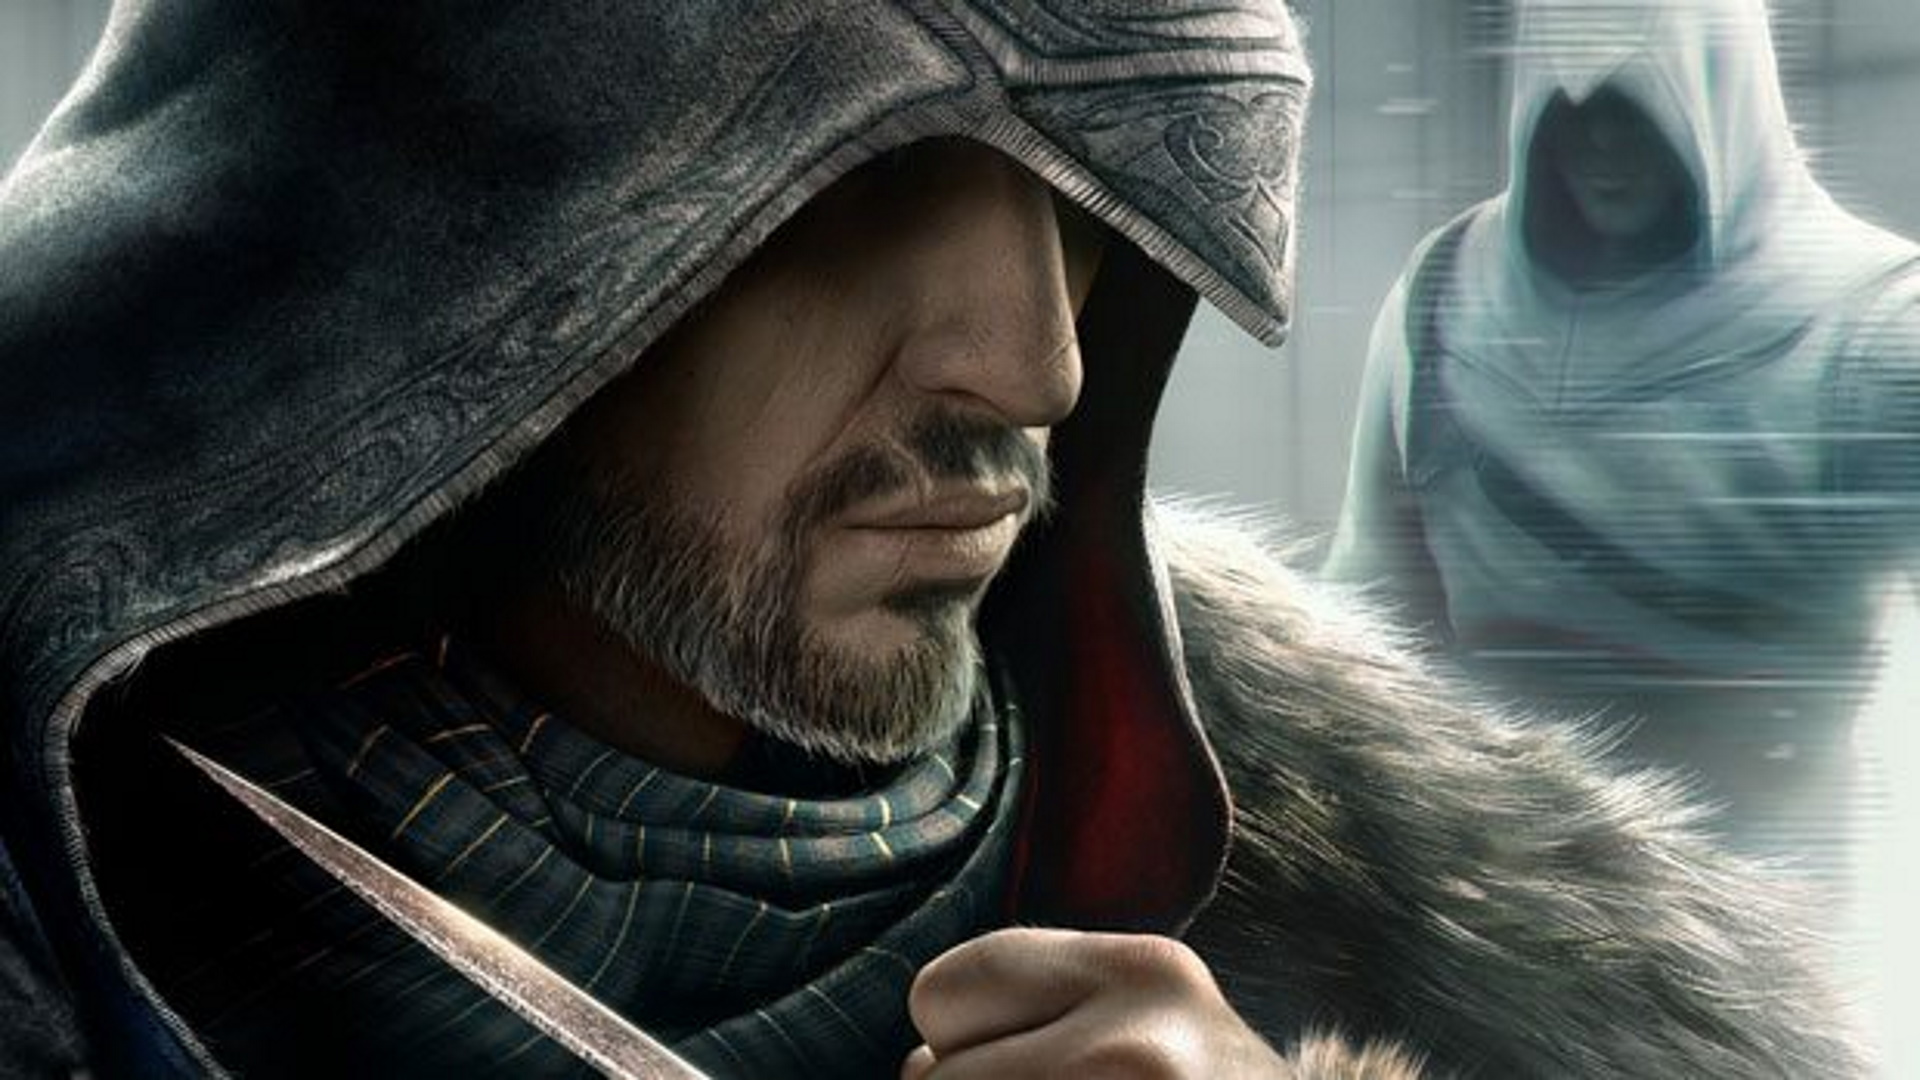 Celebrate the Assassin’s Creed anniversary with discounts